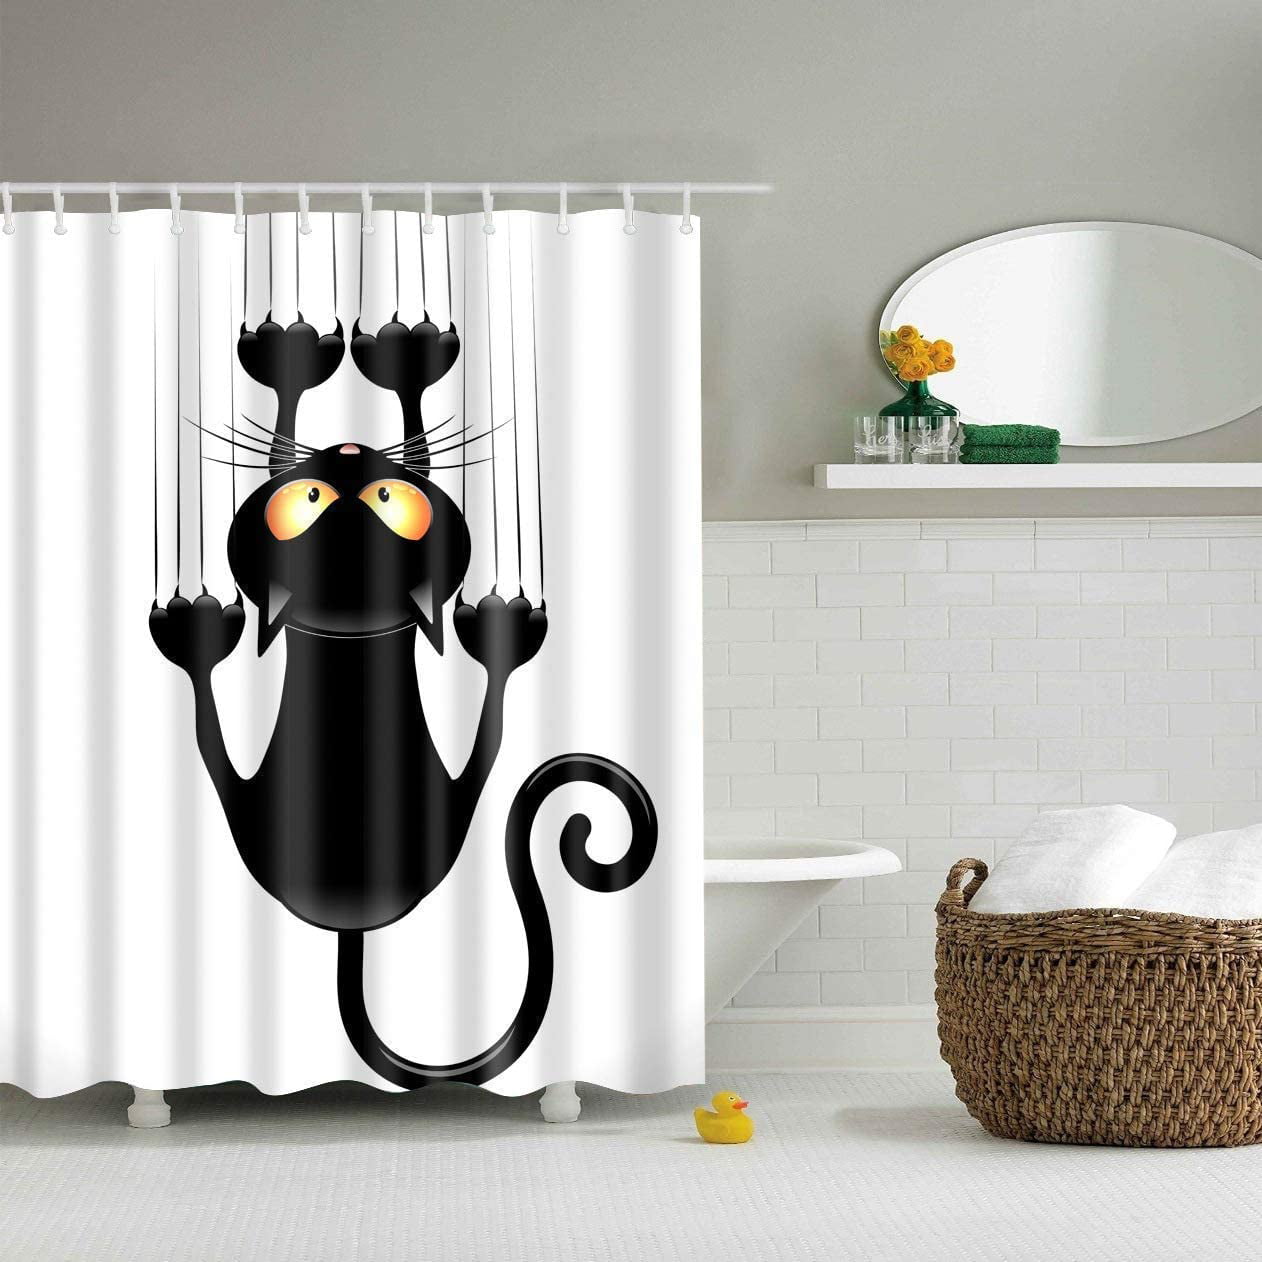 Waterproof Polyester Bathroom Shower Shower Curtain Printed With 12 Ring Hook 